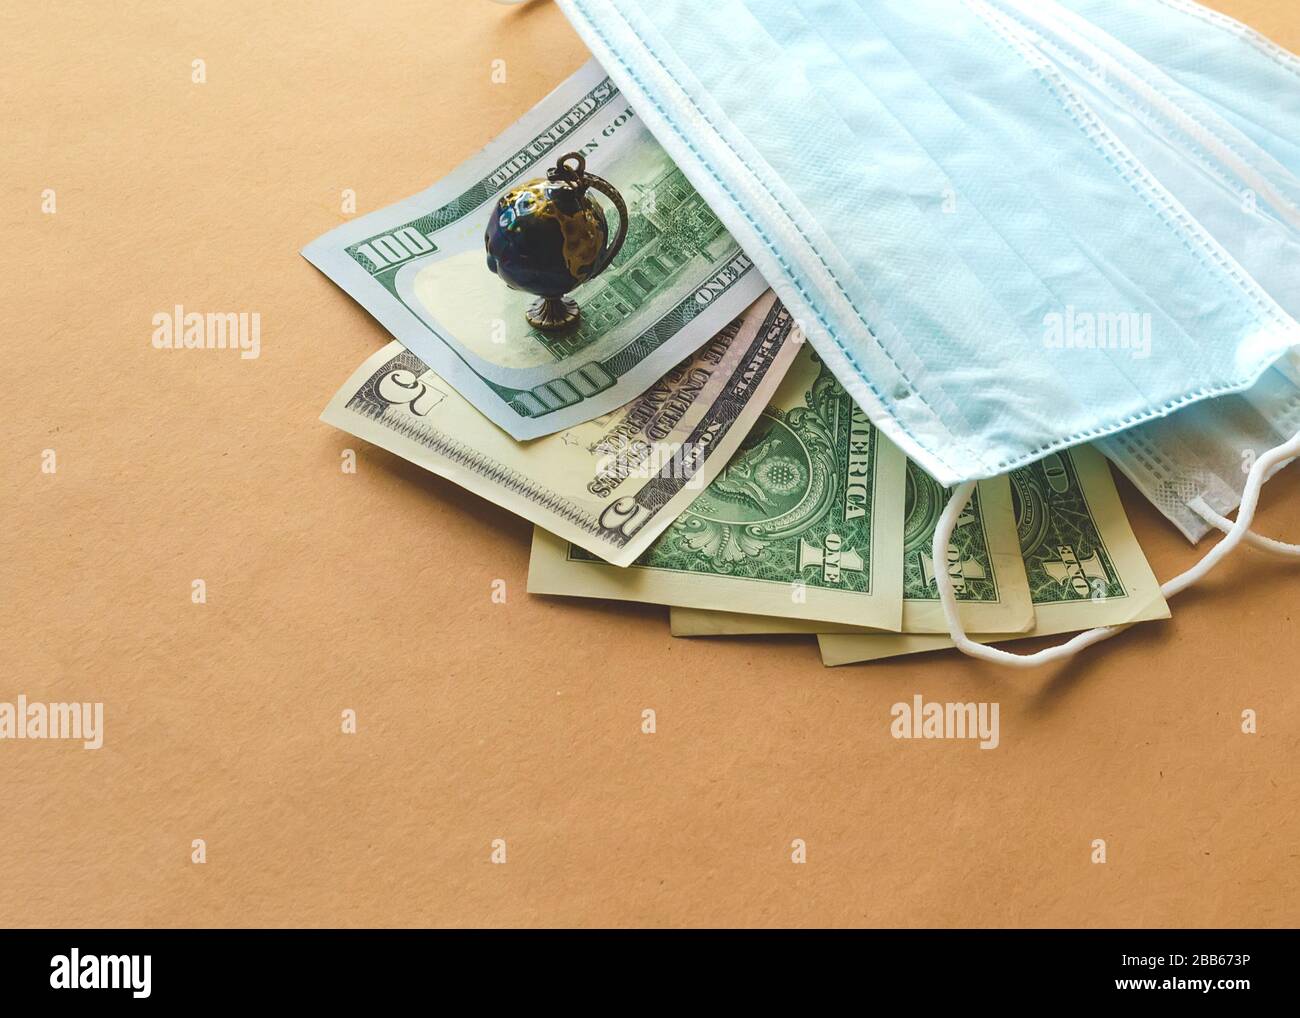 US paper currency with blue medical disposable protective masks and small globe on a brown background. Coronavirus concept Stock Photo